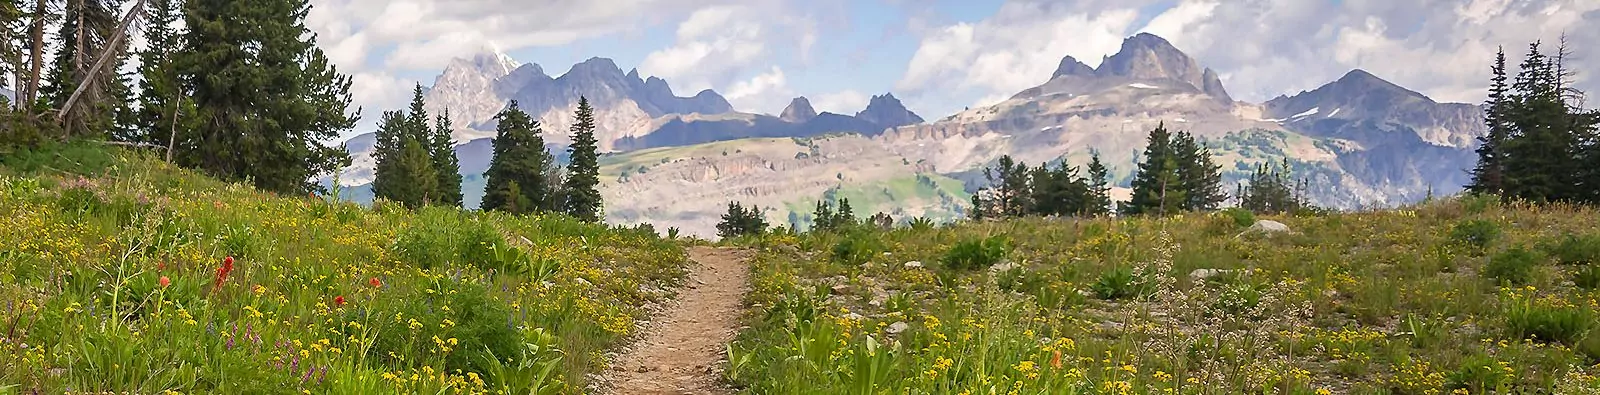 Our hike along death canyon shelf trail in the Grand Teton National Park in Wyoming